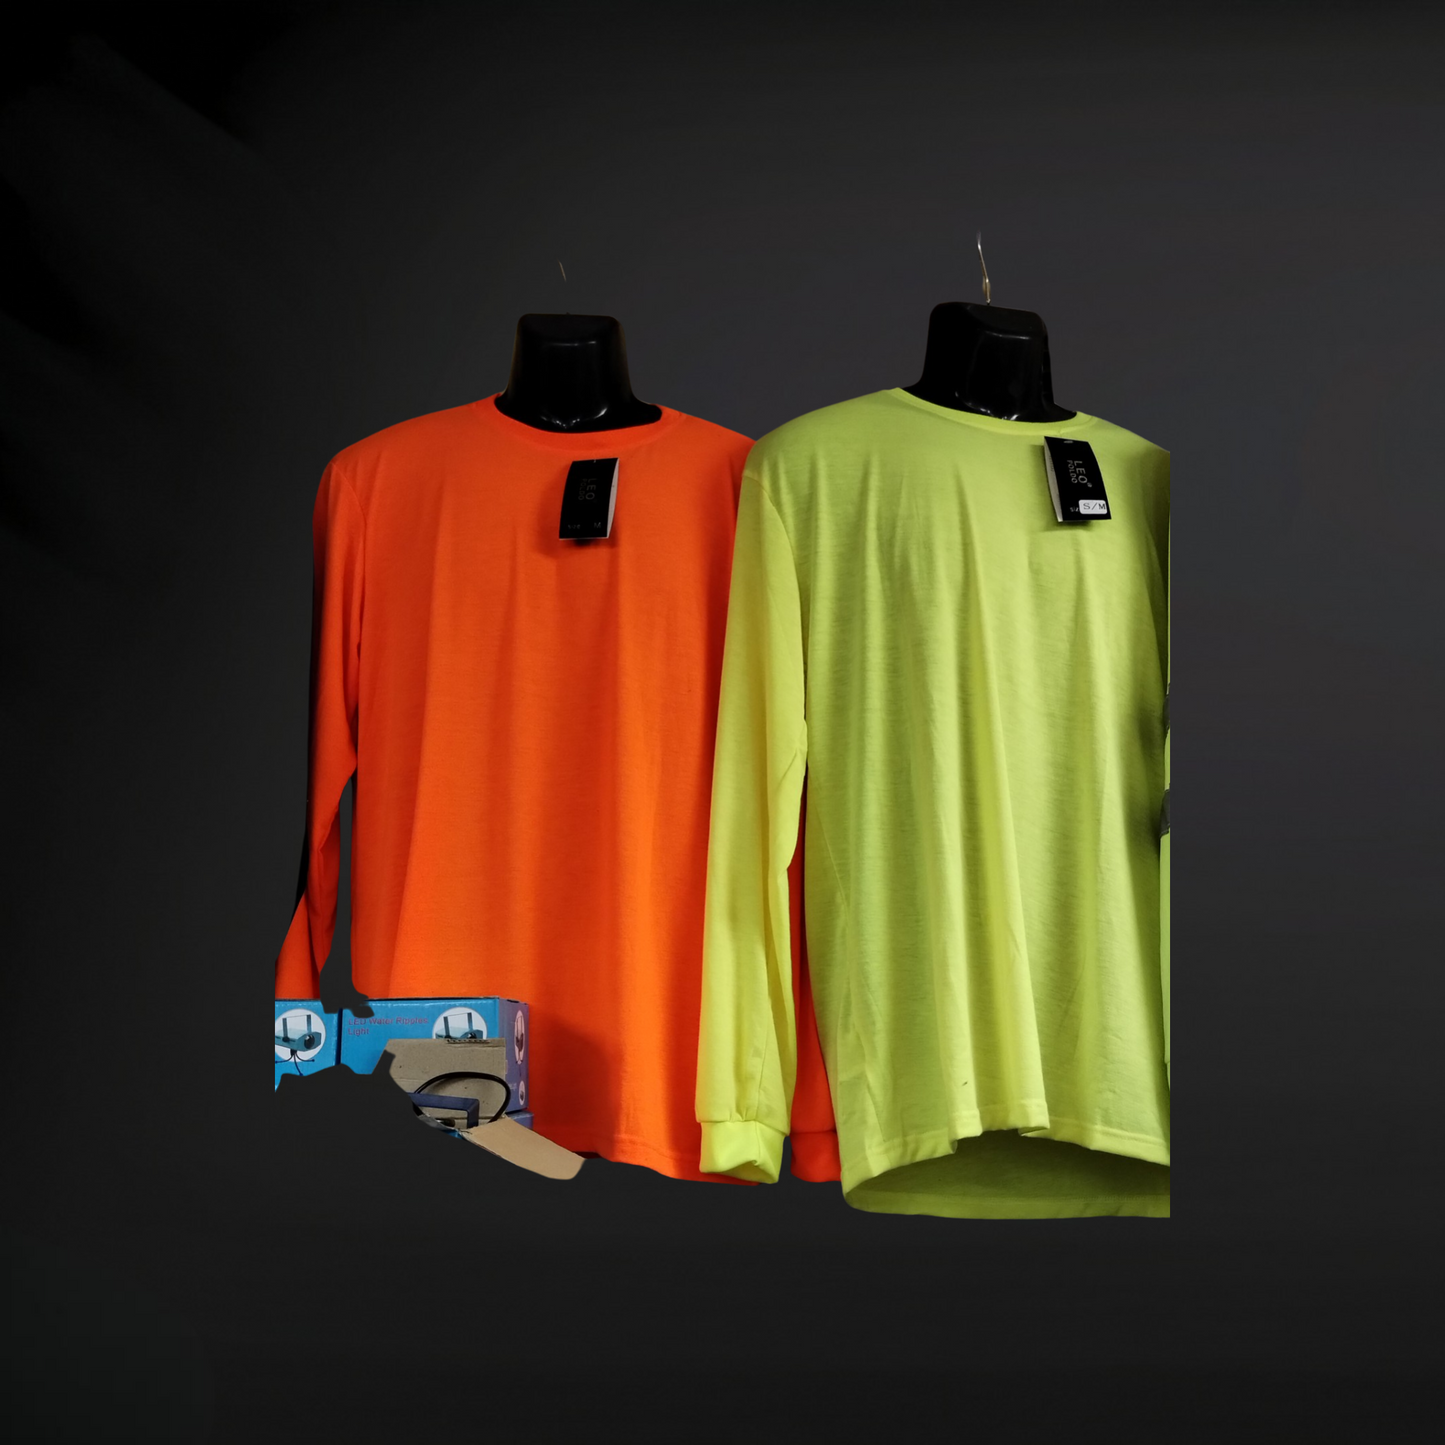 High Visibility Long Sleeve Shirt for Construction & Traffic Guard | Bright Orange/Yellow